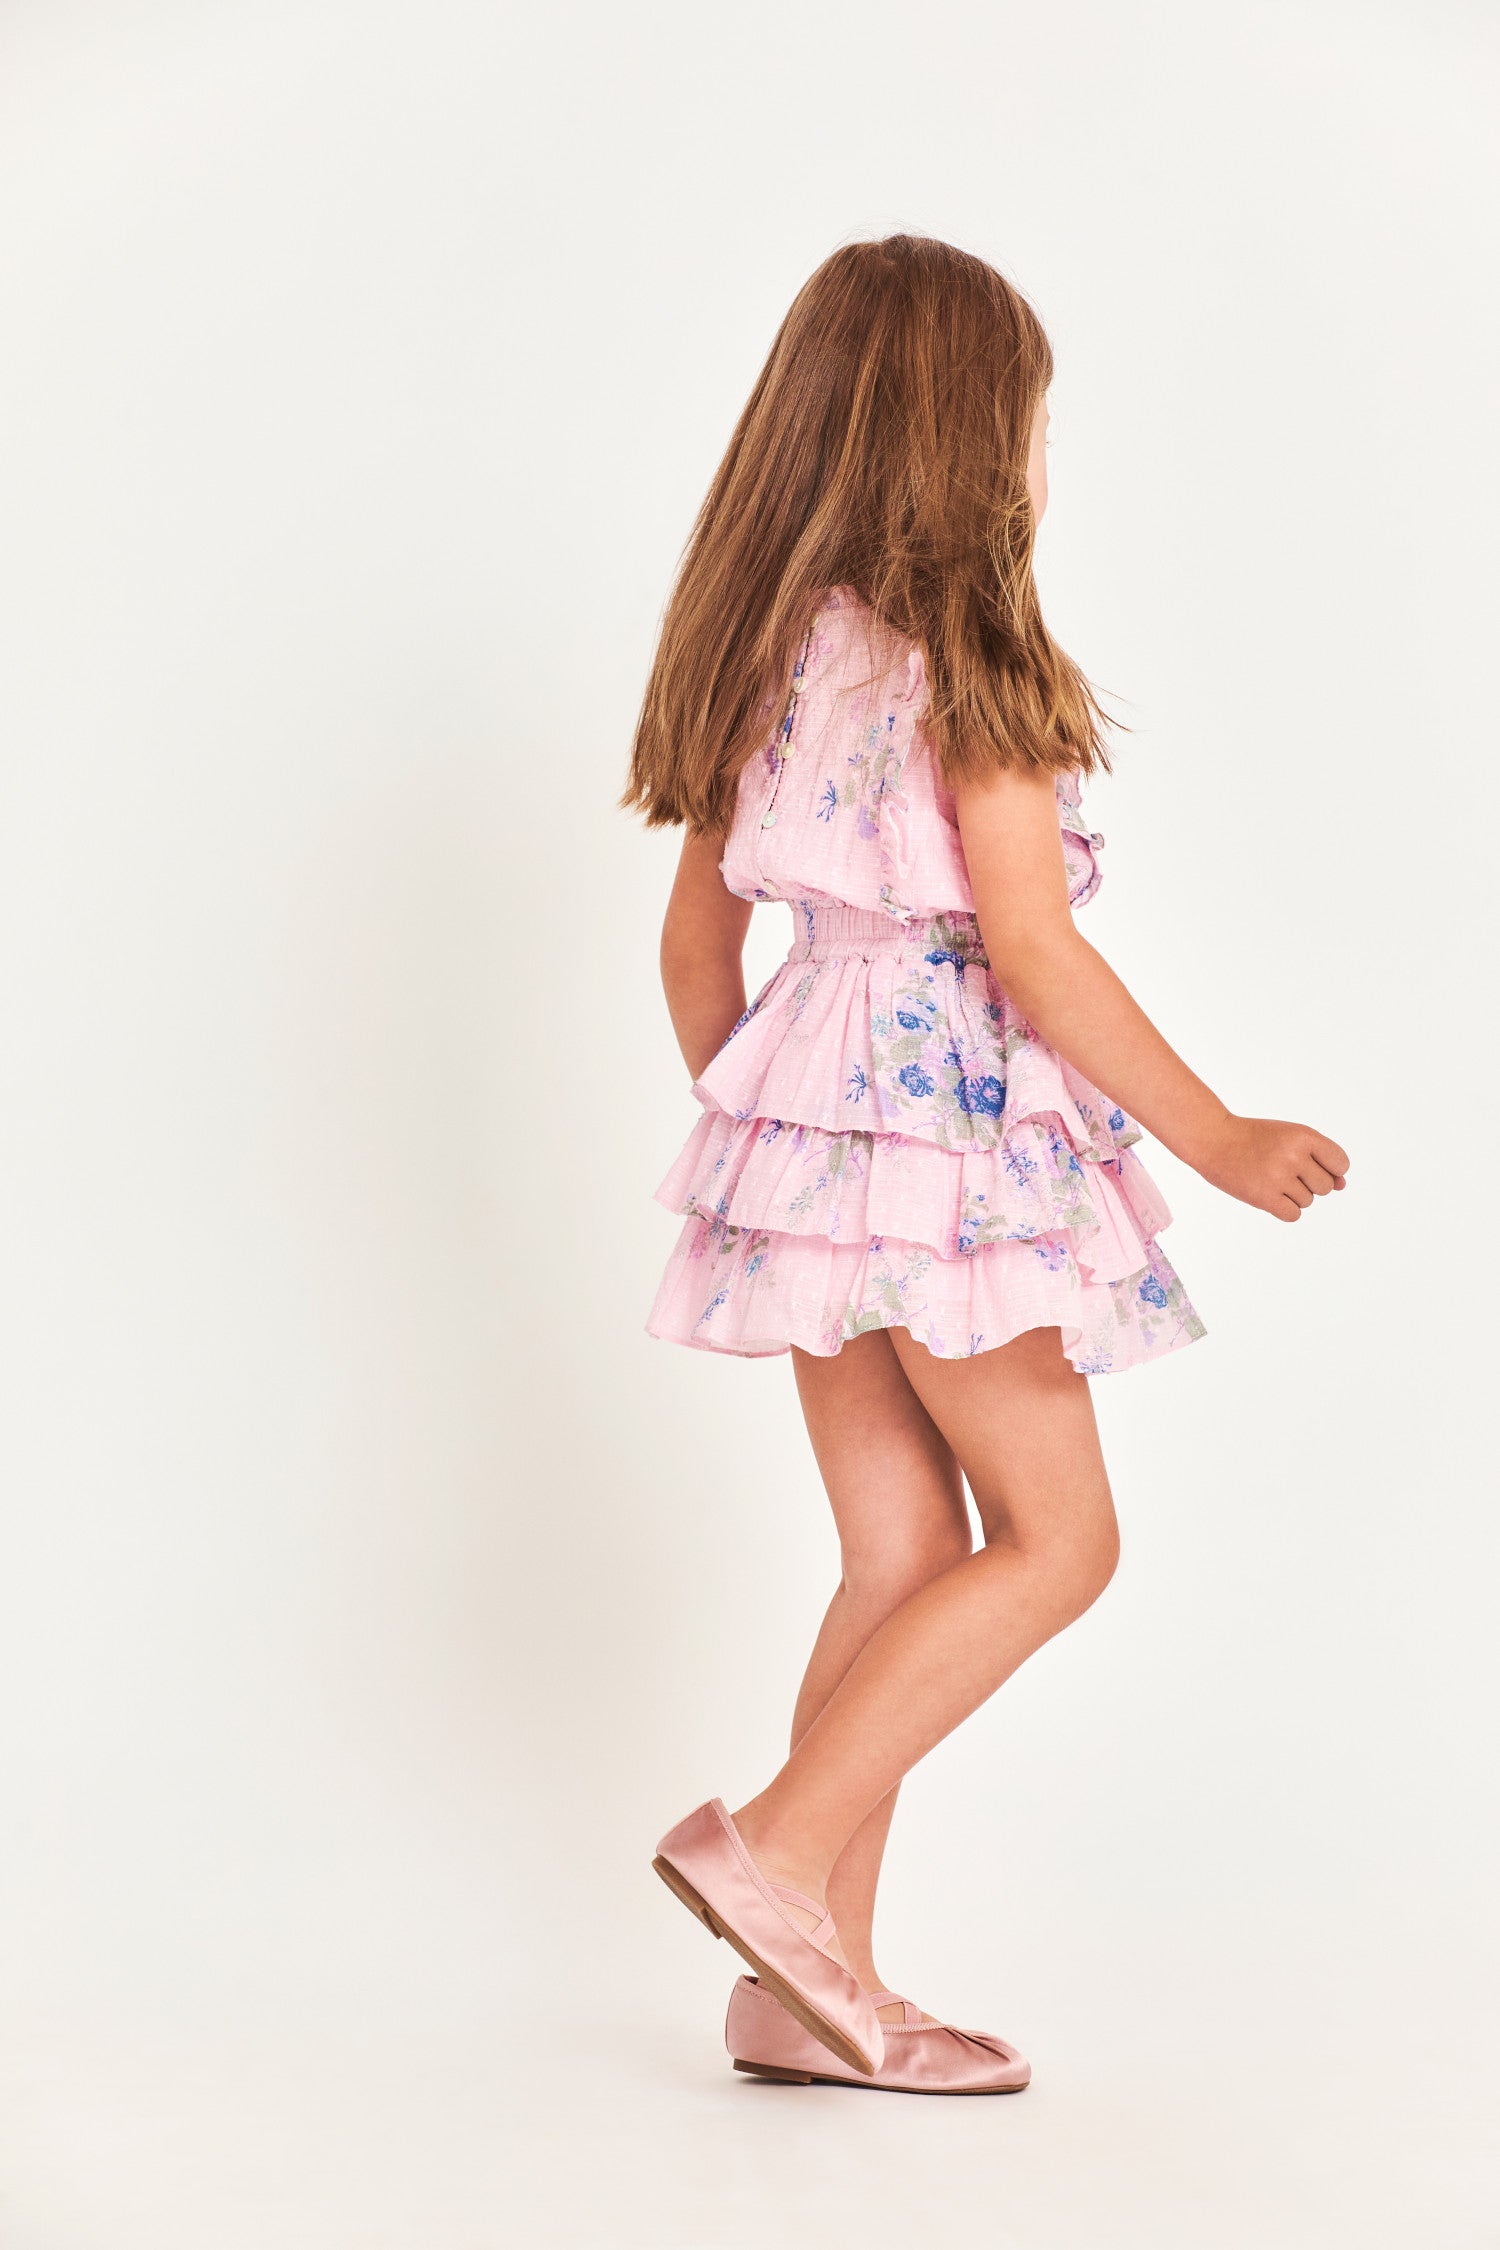 Dress for girls in 100% cotton with custom lace. This easy frock has a ruffle-trimmed collar, buttons down center front, flutter sleeves, an elastic waist and overlapping asymmetrical ruffles at the skirt.